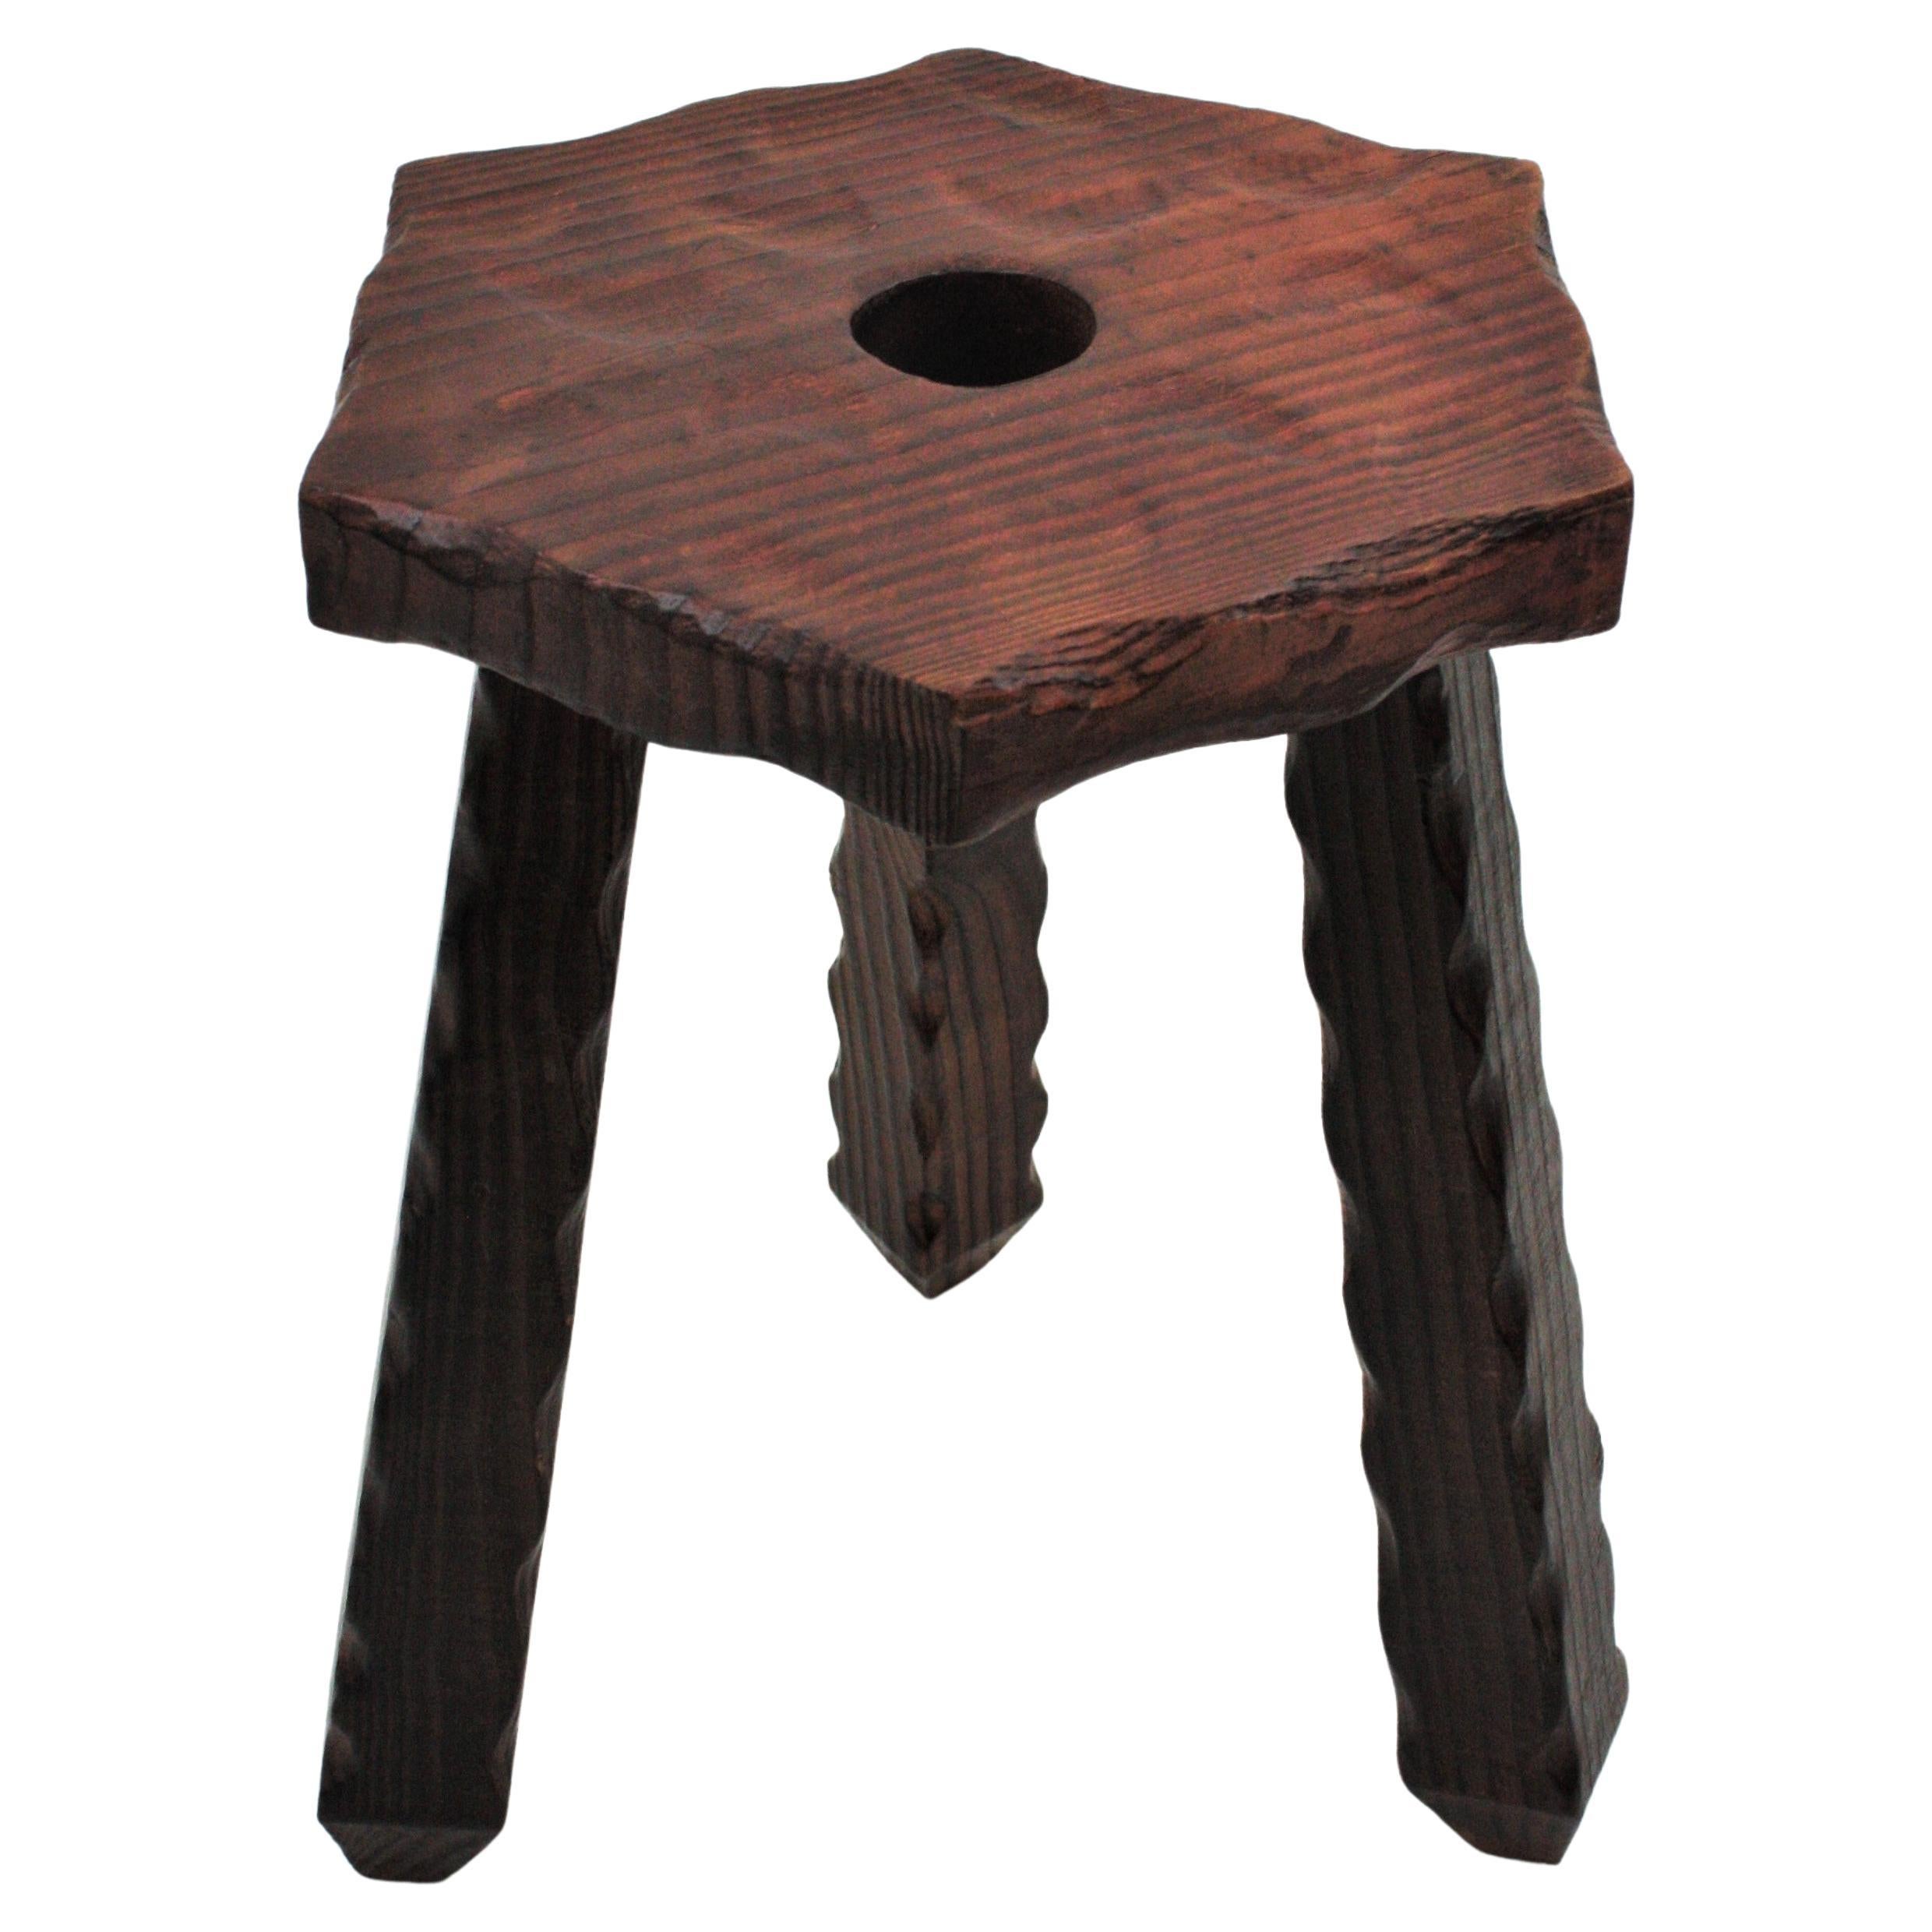 Hexagonal Wooden Tripod Stool, Spain, 1940s
The top has scalloped details at the edge and the top has decorative carvings and a hole at the central part. 
This stool has a rustic finish and spanish colonial accents.
It will be a nice a addition to a